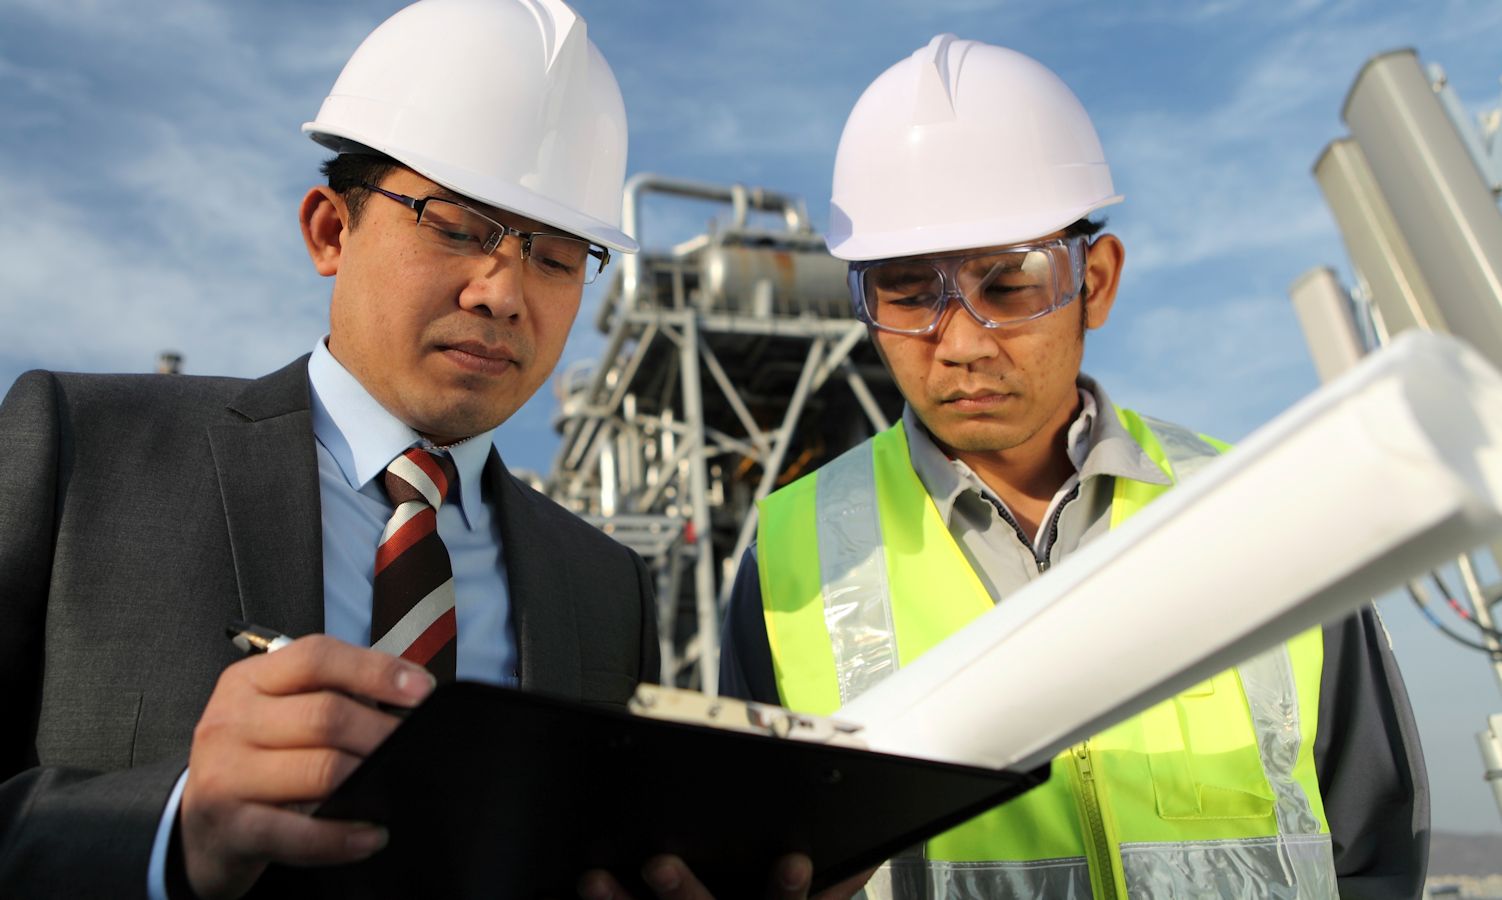 Two workers looking at a clip board.